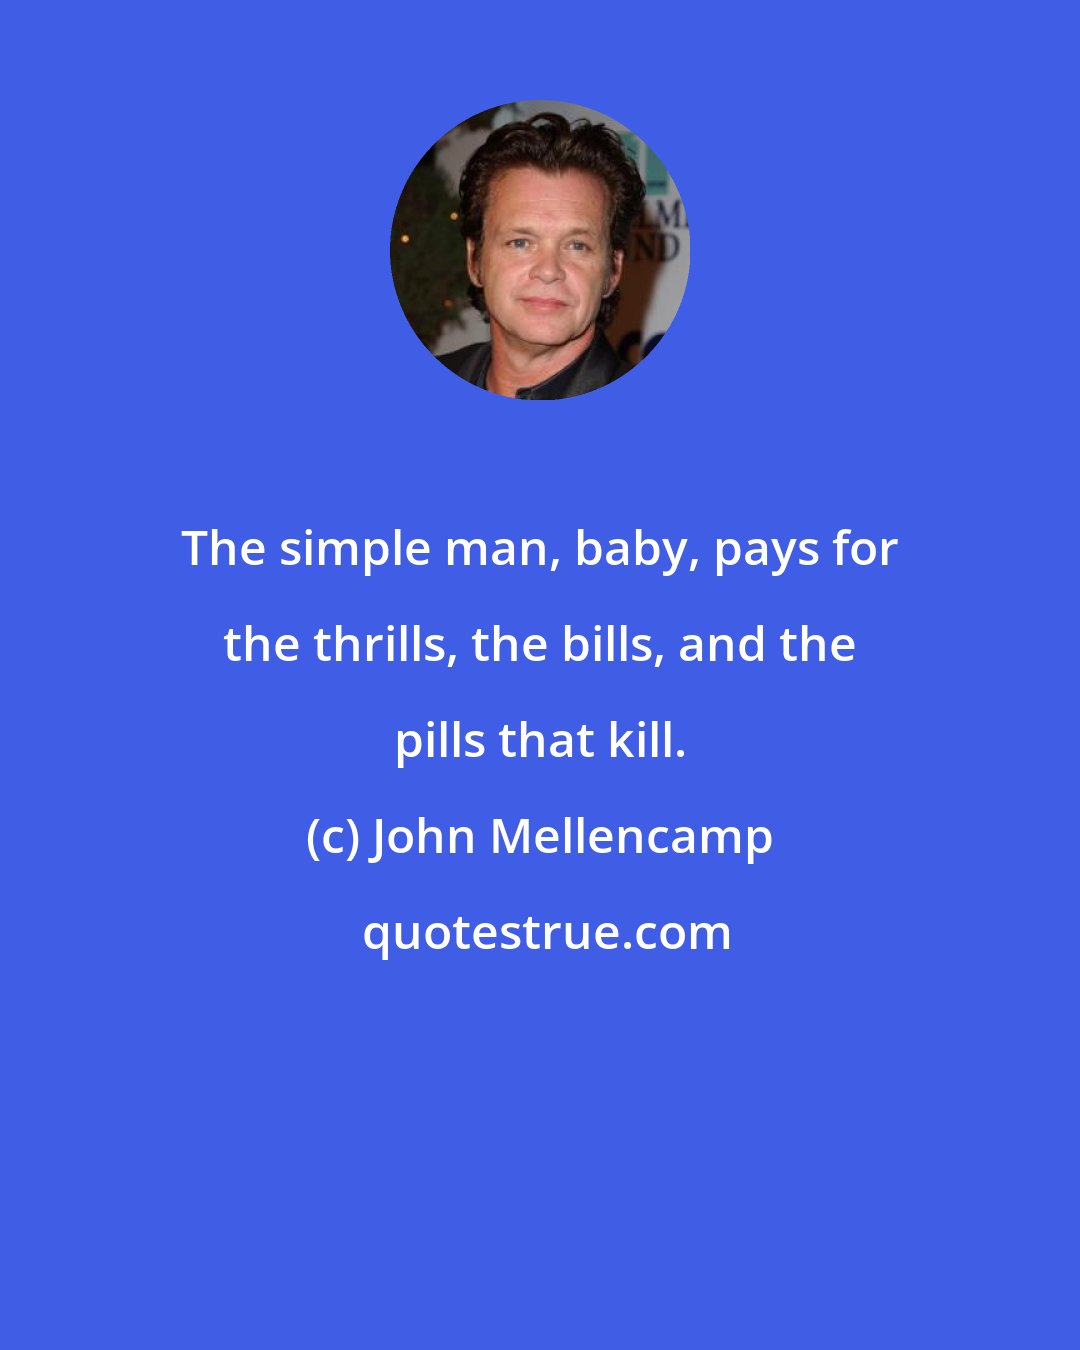 John Mellencamp: The simple man, baby, pays for the thrills, the bills, and the pills that kill.